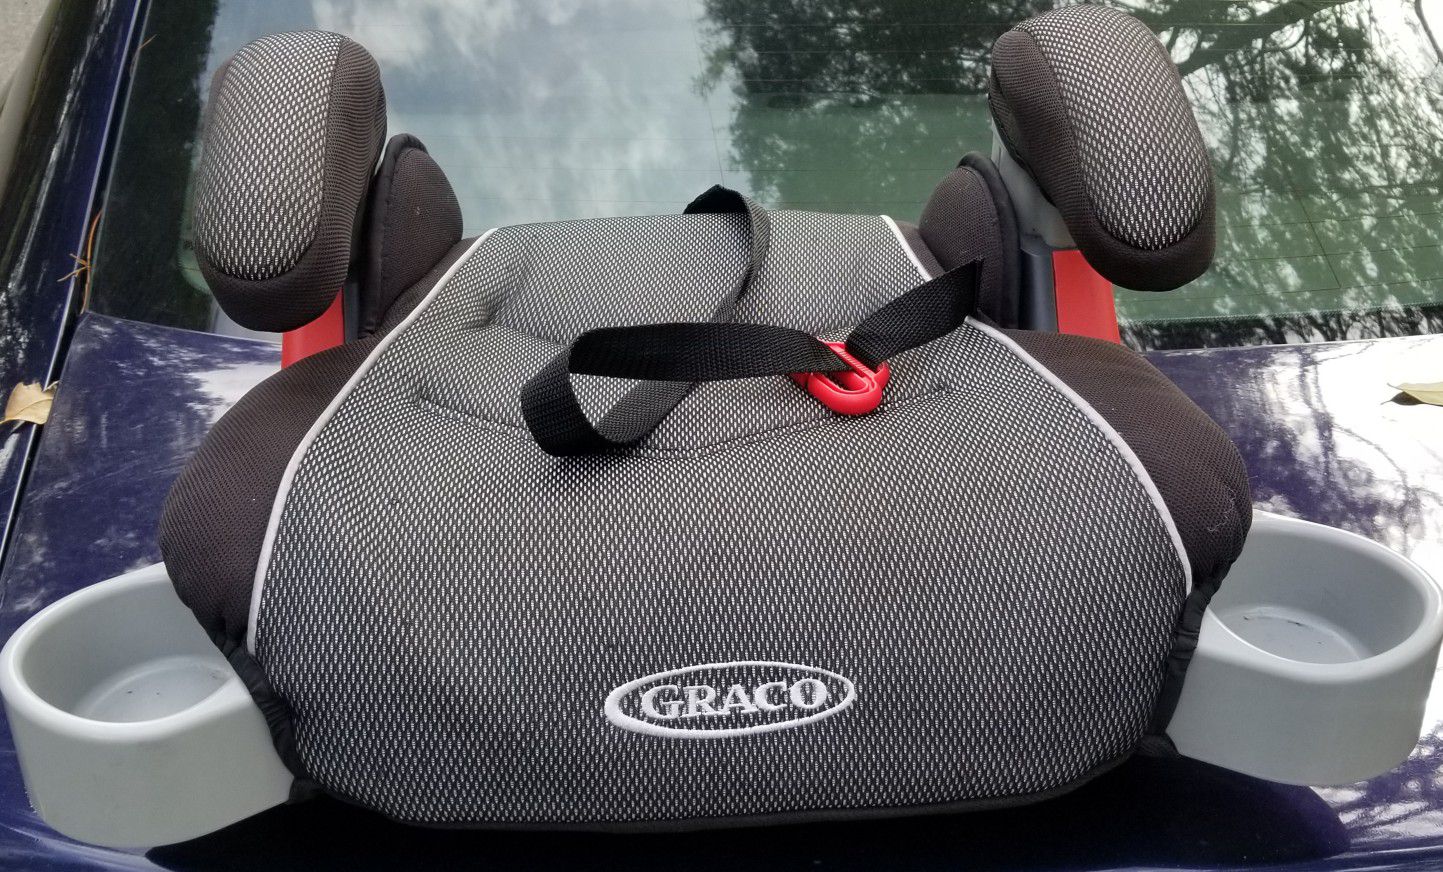 Graco Booster Car Seat w/ cup holders